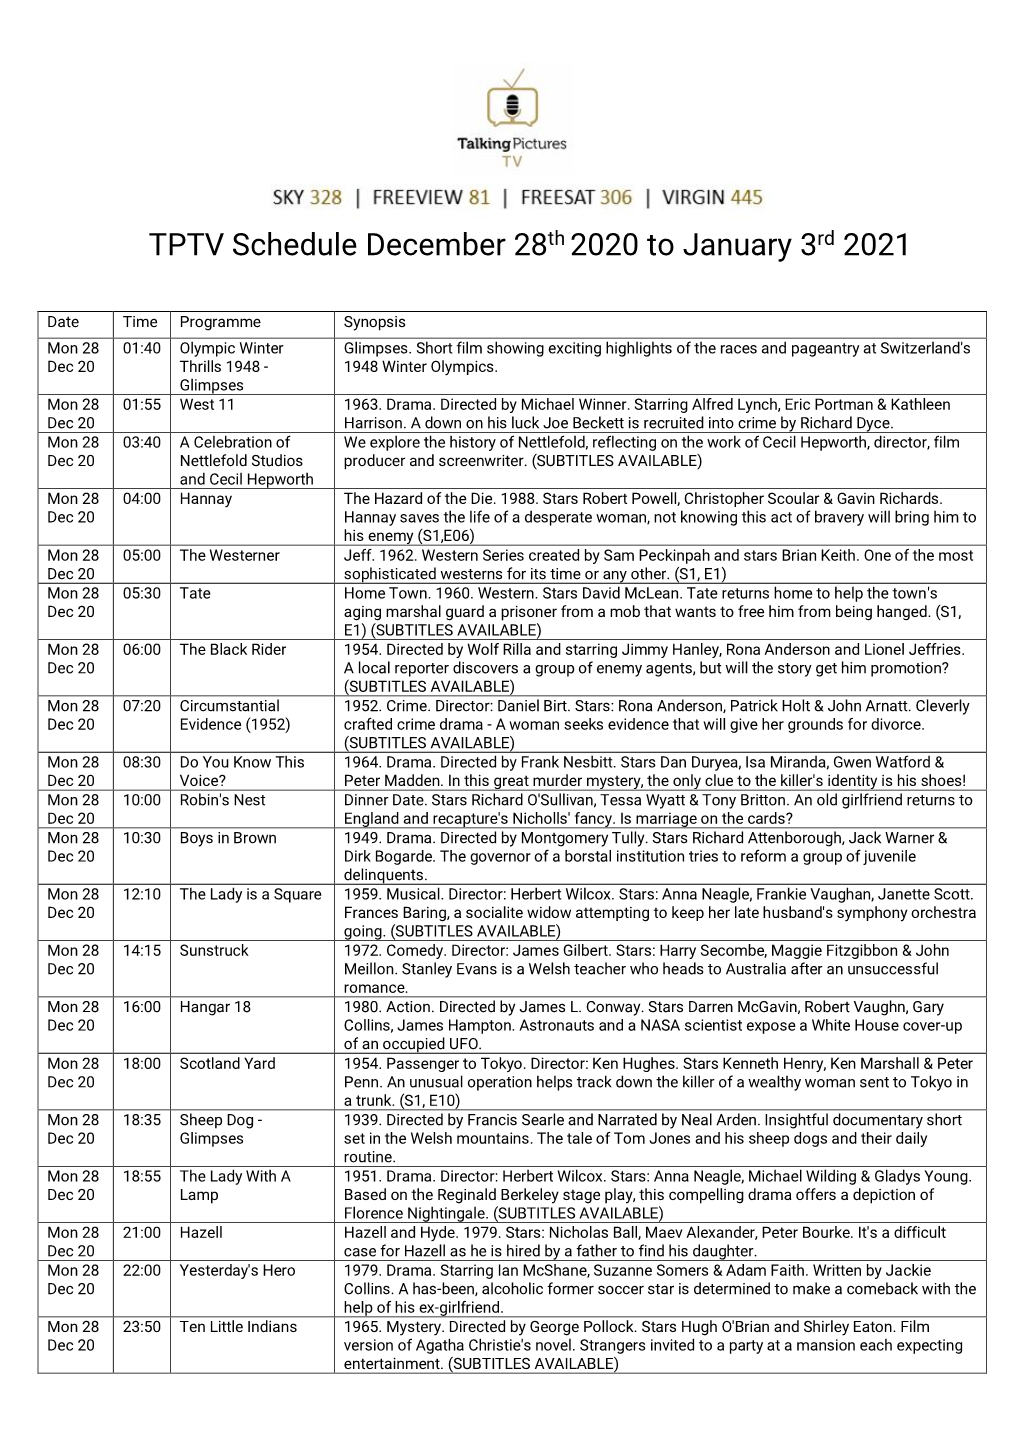 TPTV Schedule December 28Th 2020 to January 3Rd 2021